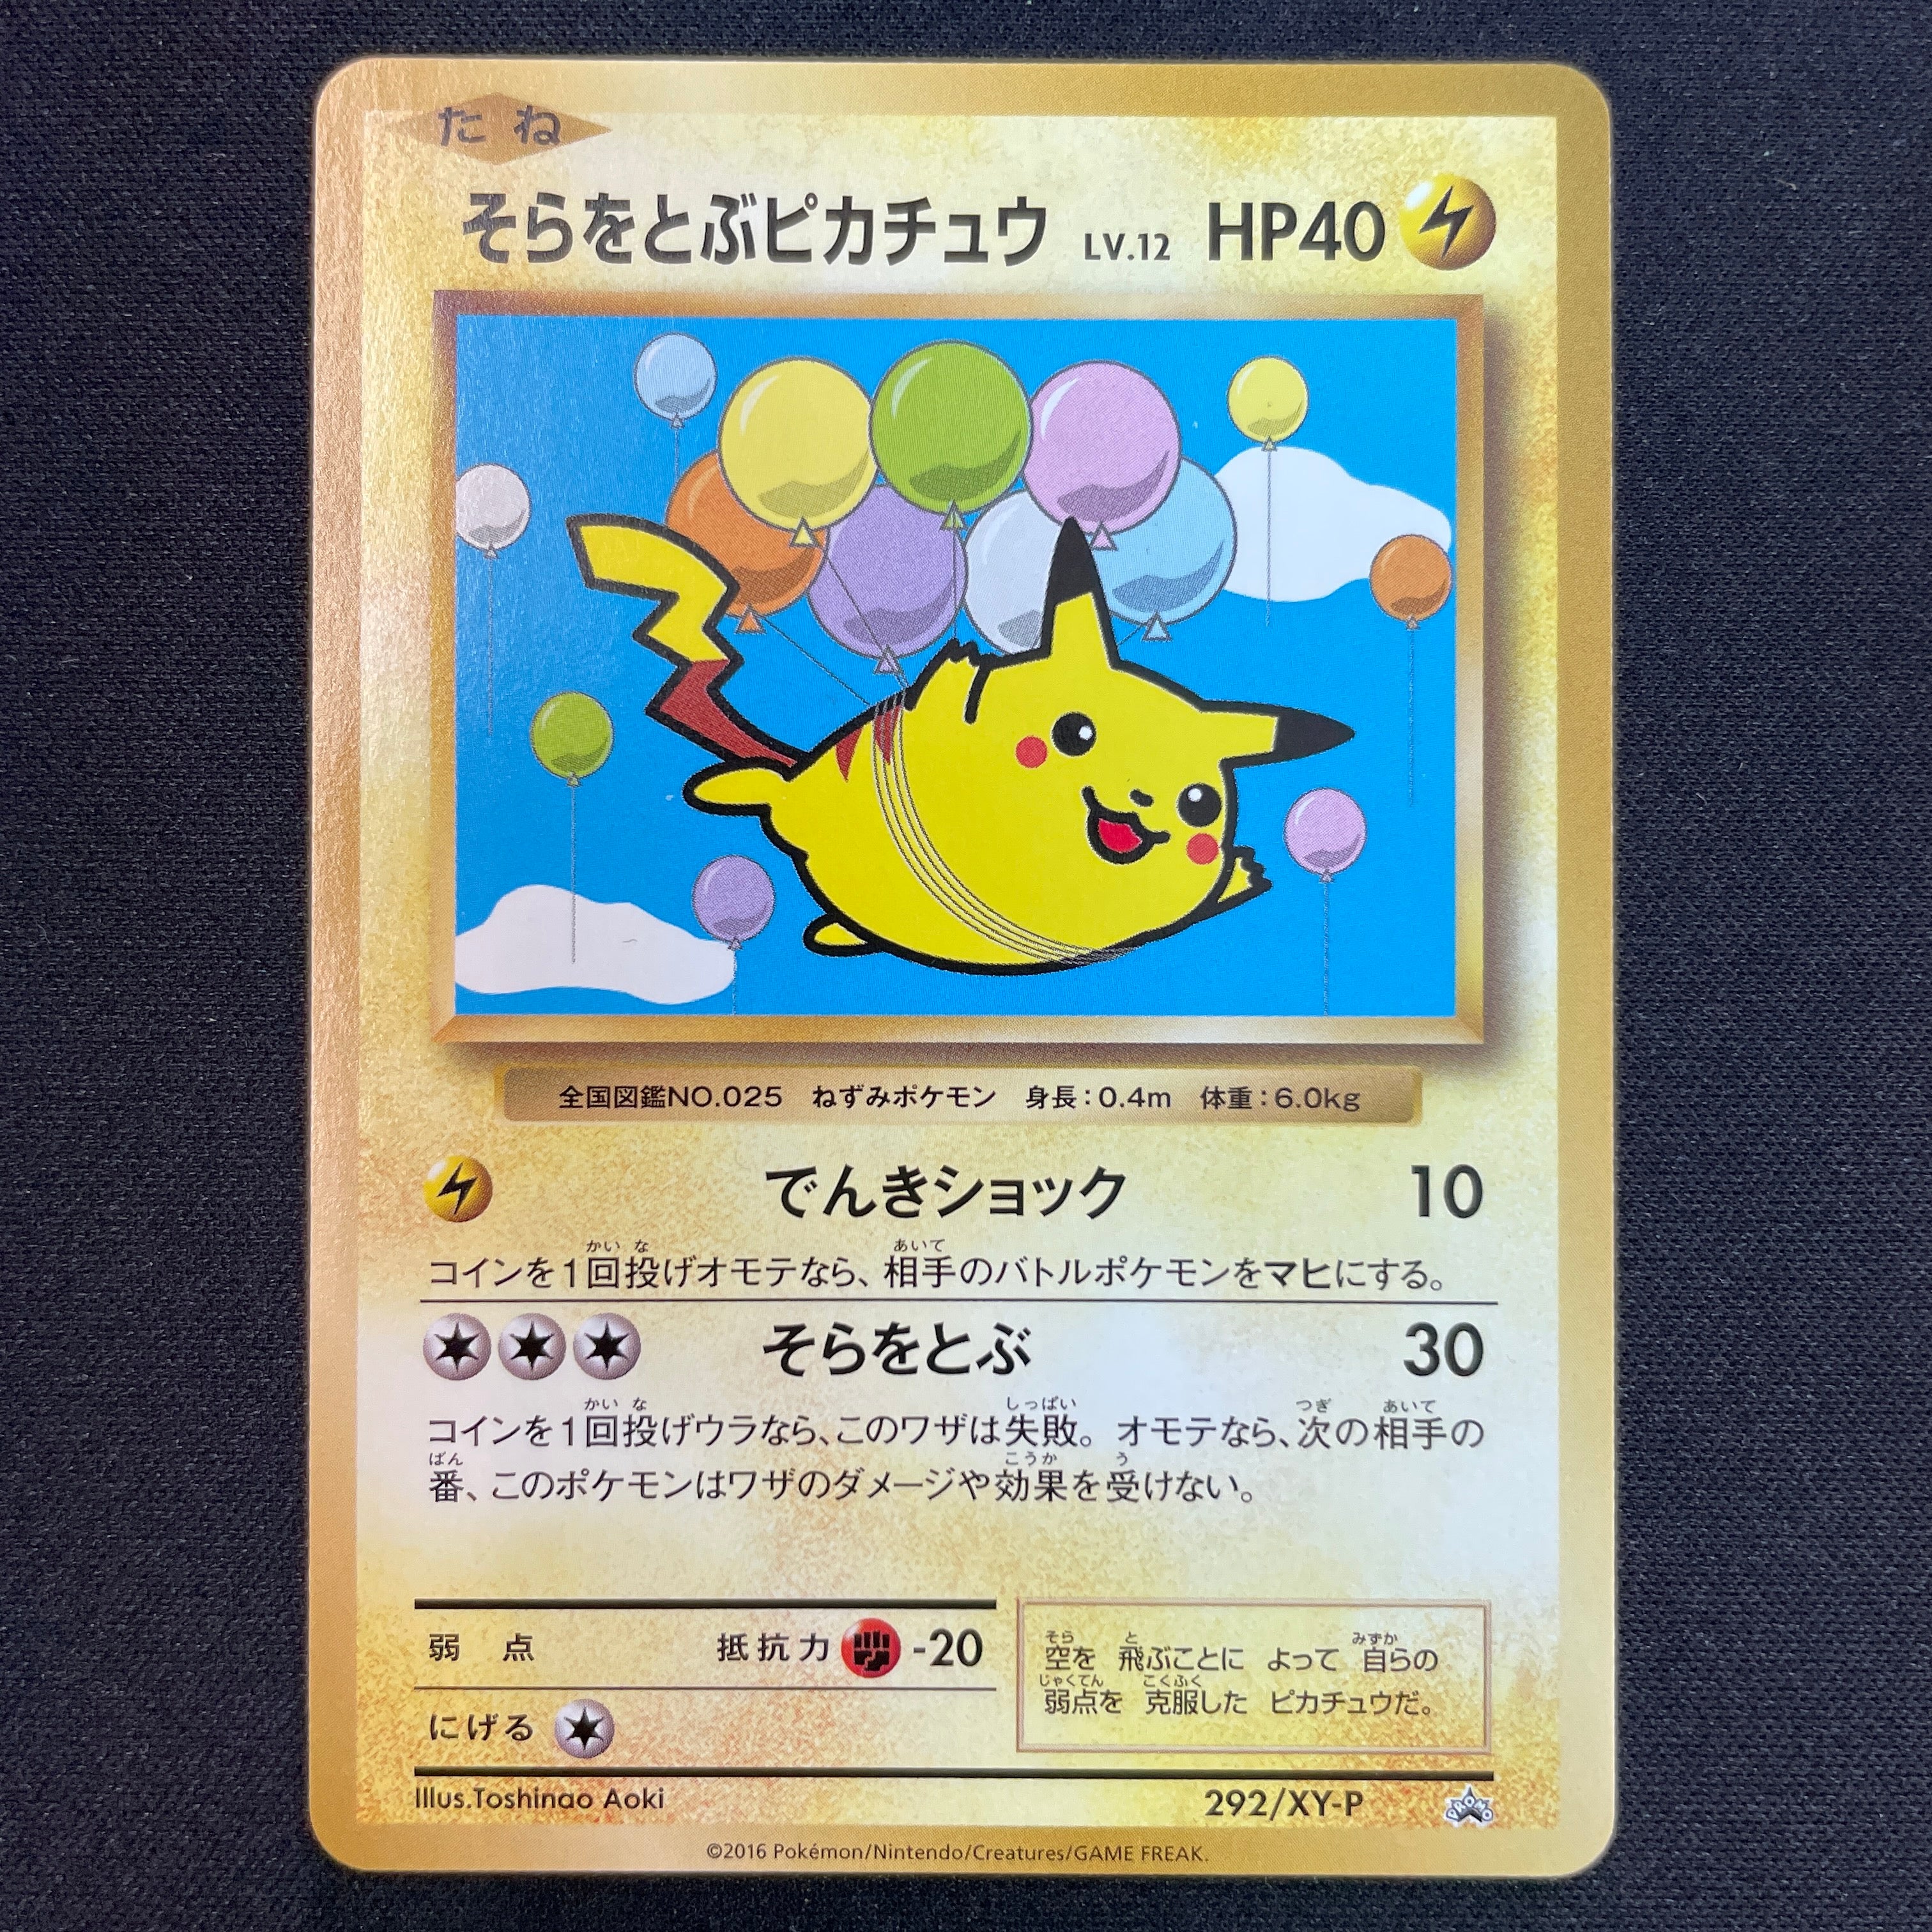 Pokémon Card Game XY PROMO 292/XY-P  Sora wo tobu Pikachu  Have with dot on the back up and down